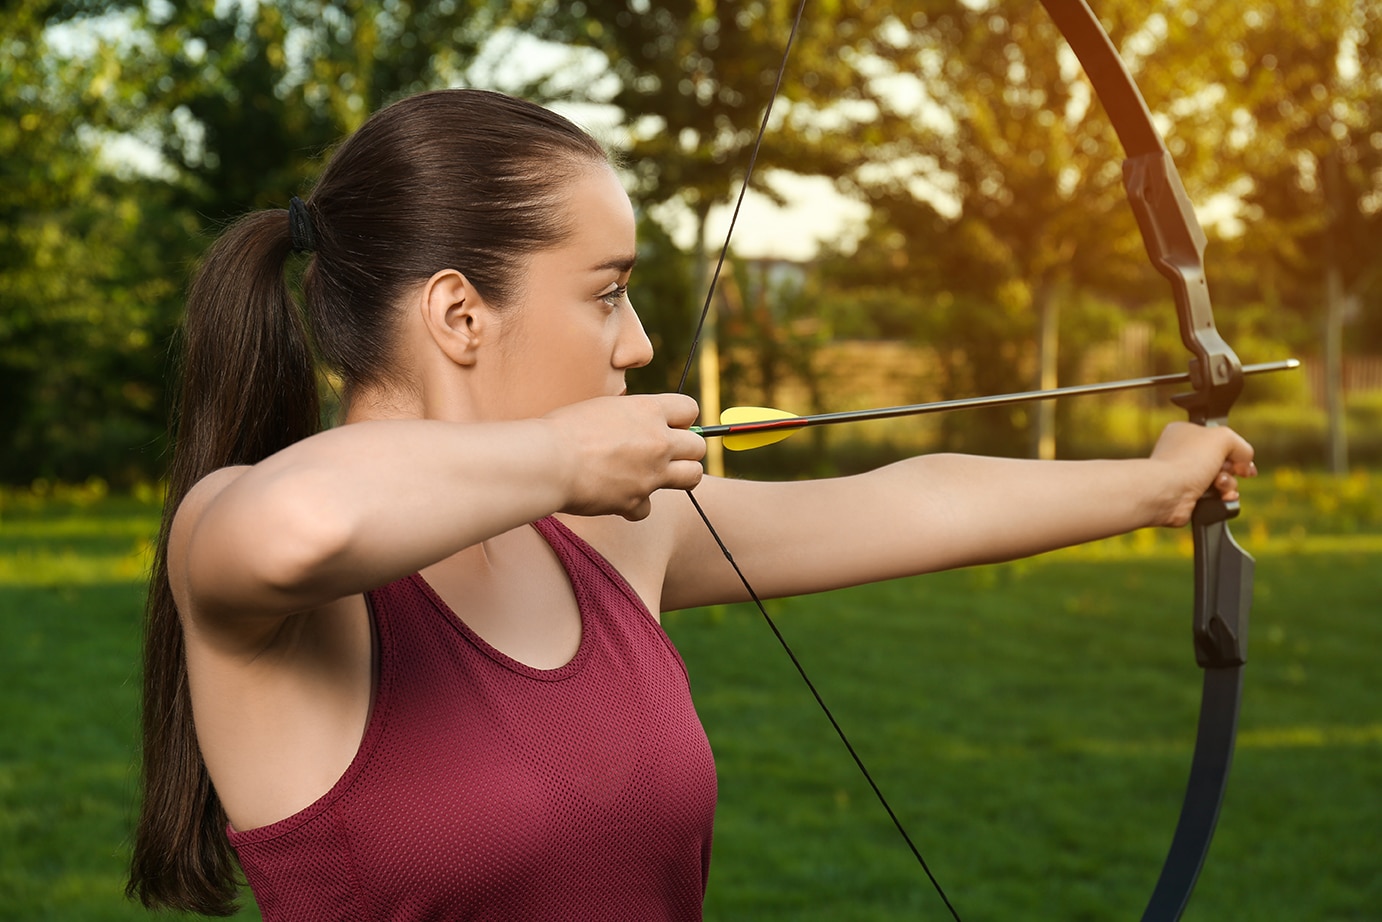 Women bows and arrows